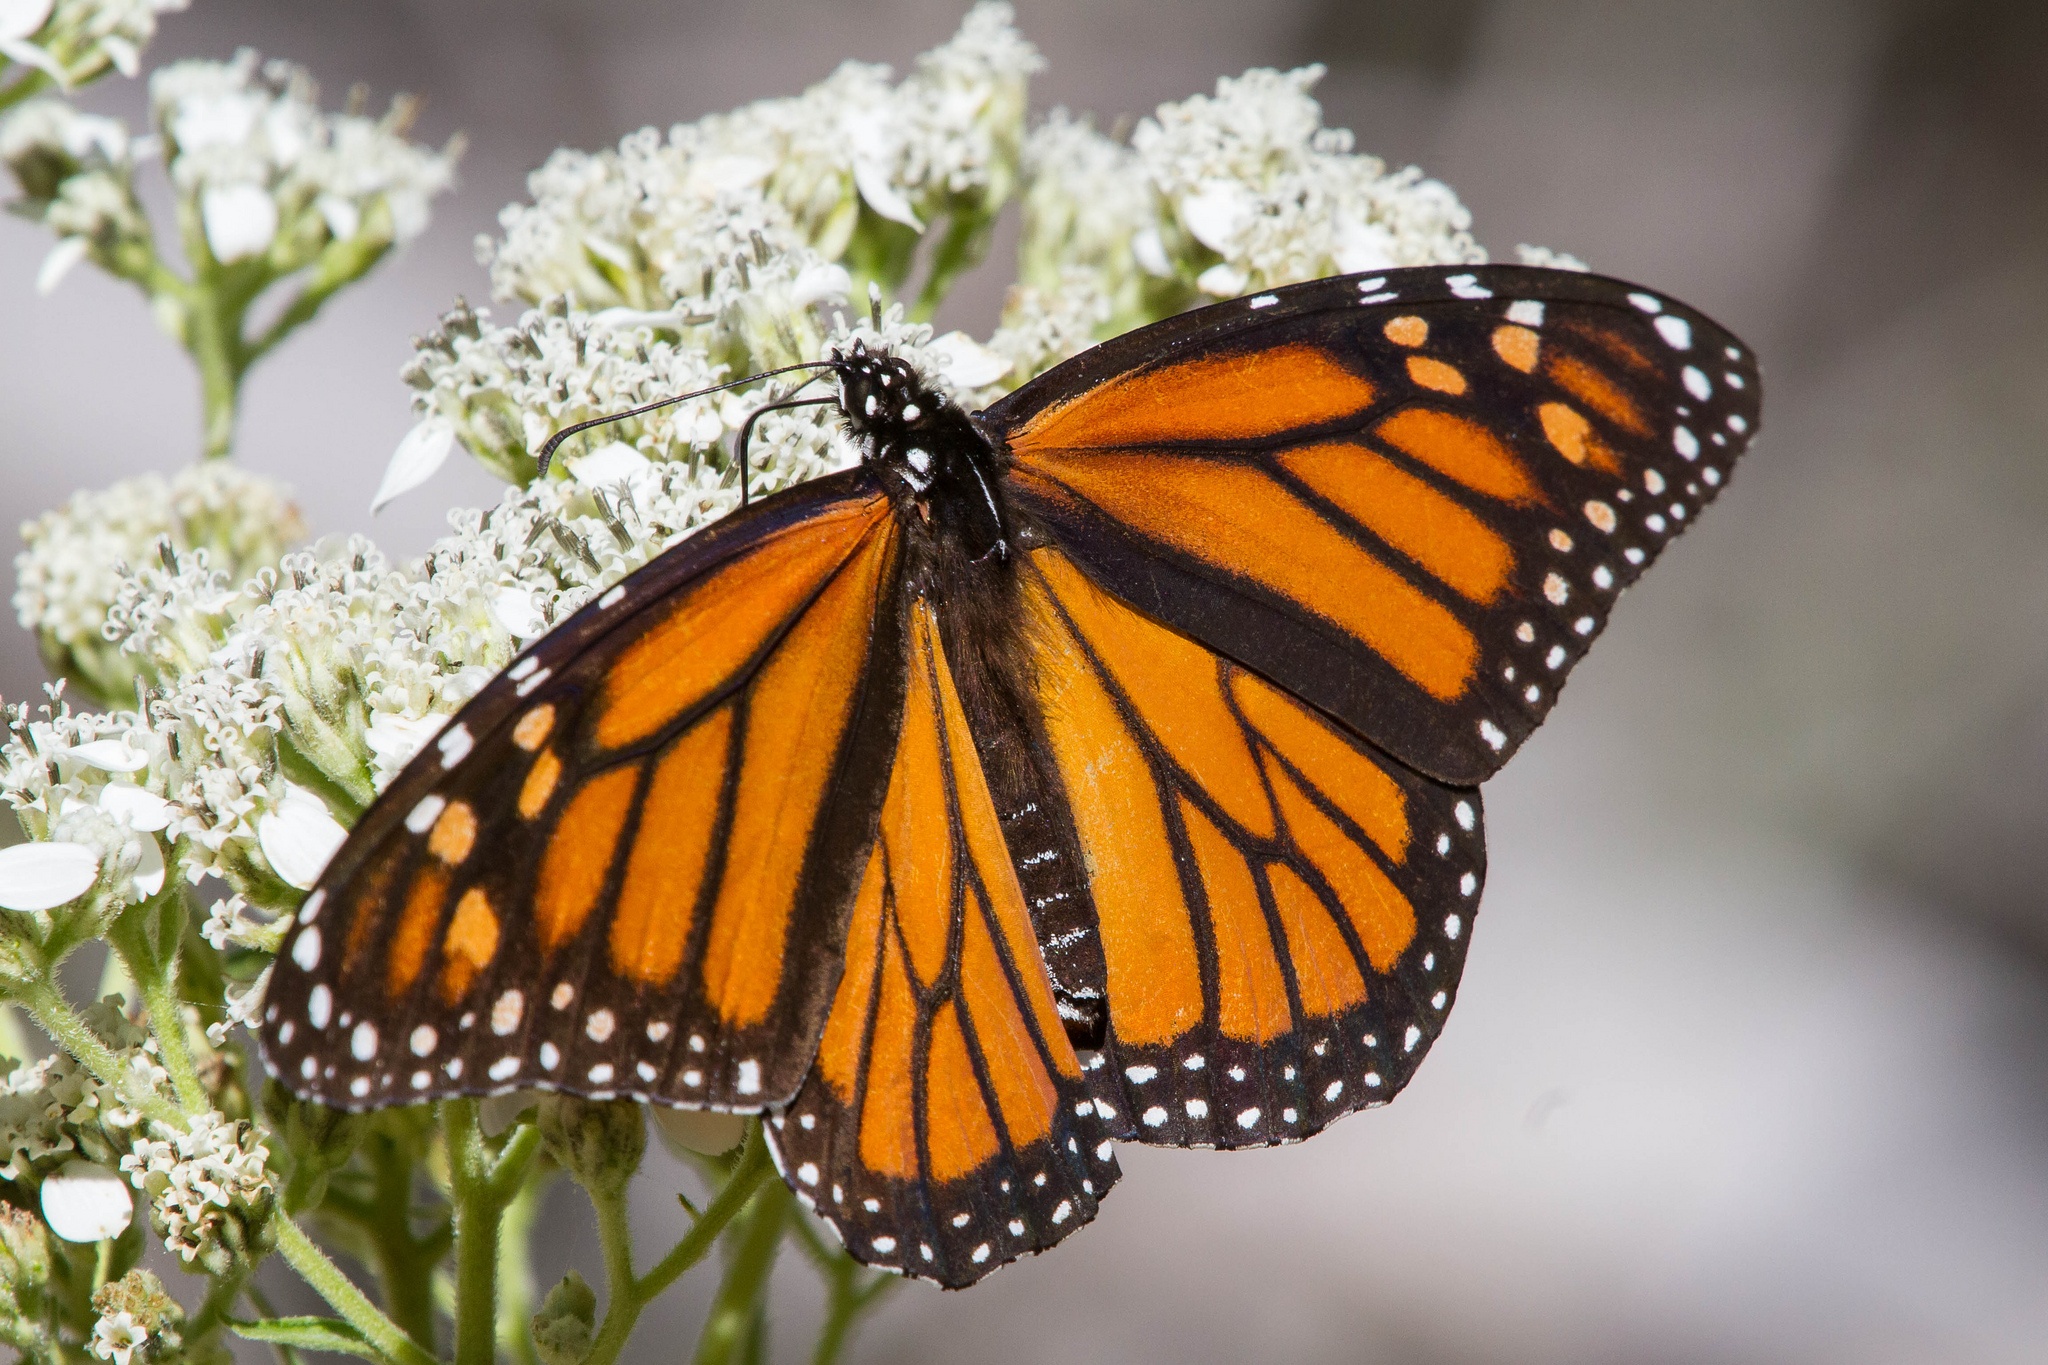 austin-texas-creates-habitat-for-the-declining-monarch-butterfly-the